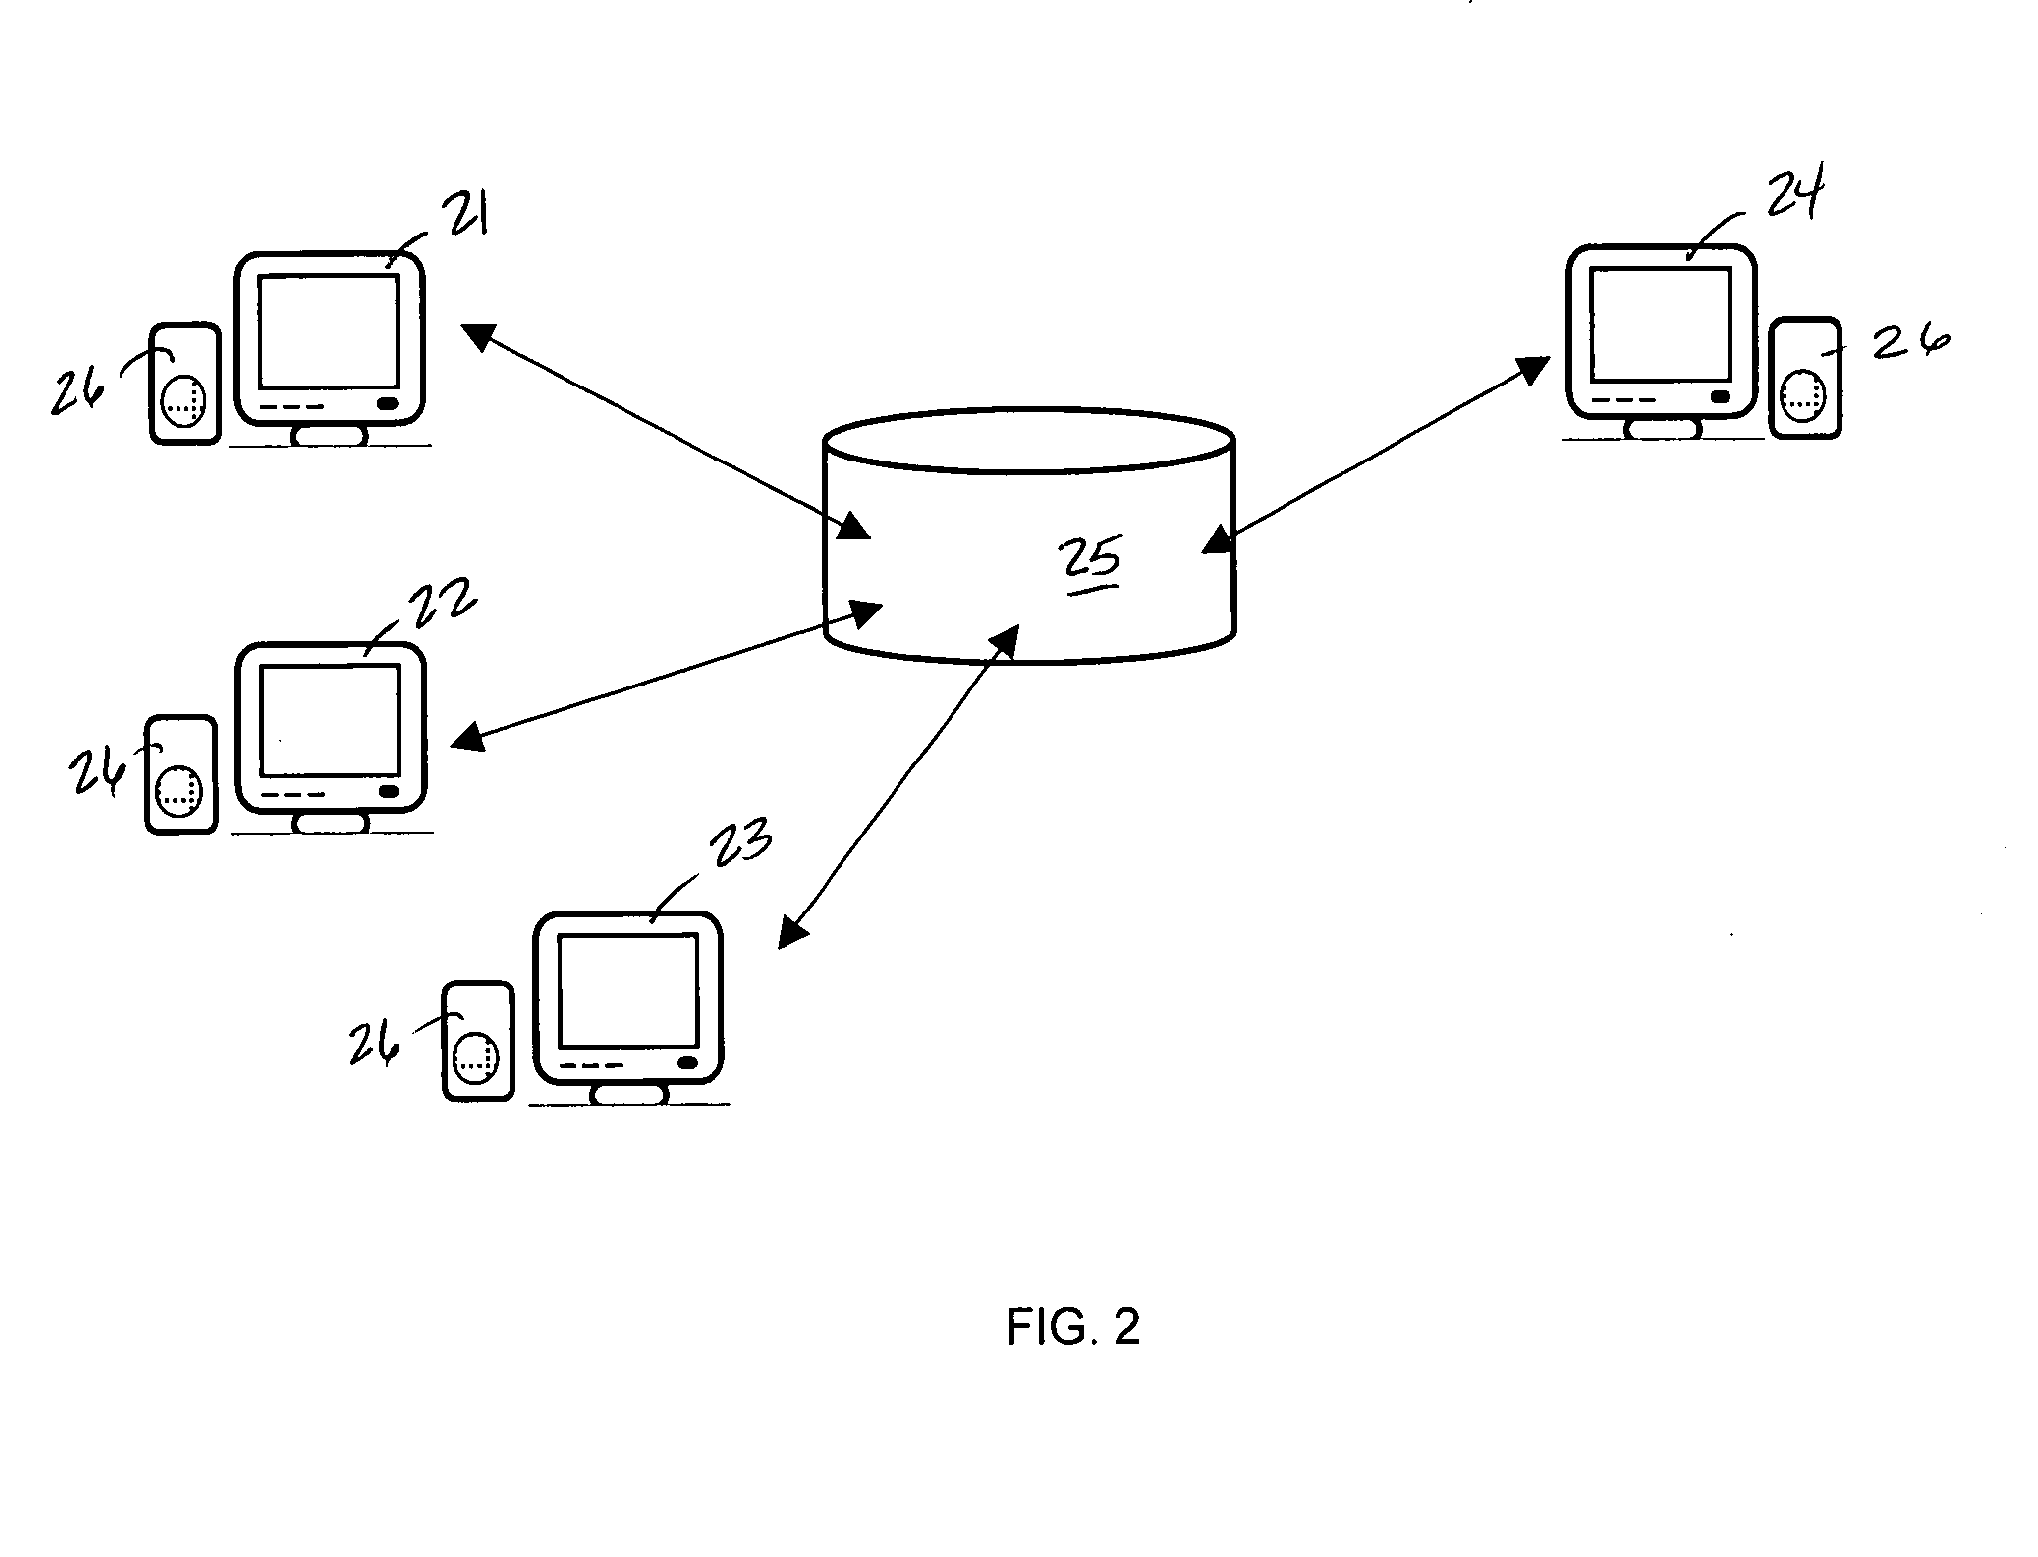 Method and Apparatus for Website Navigation by the Visually Impaired